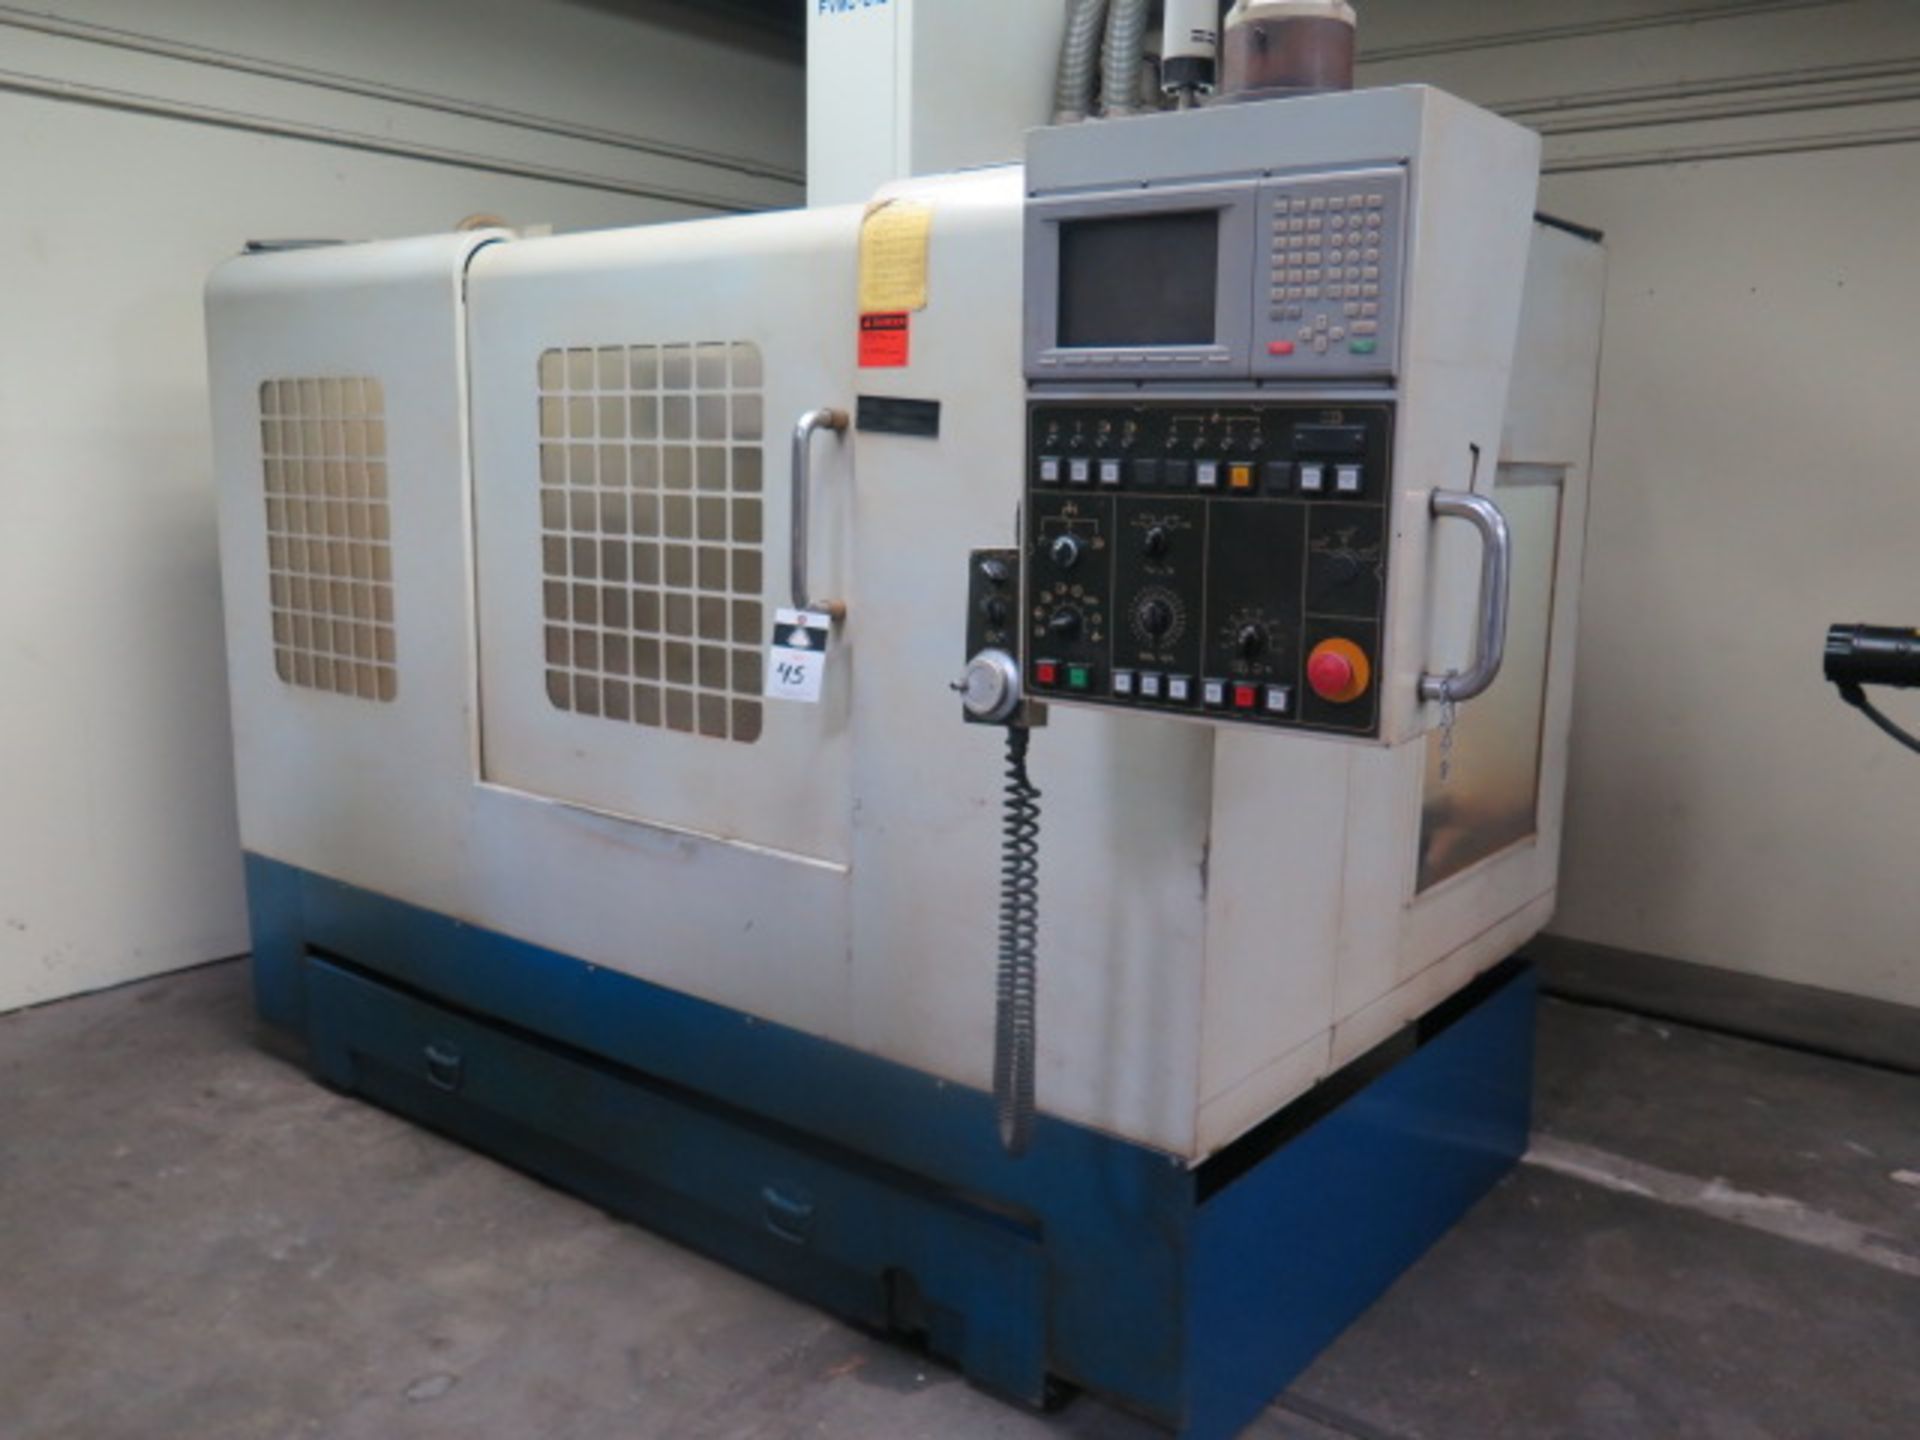 Acra FVMC-810 CNC VMC s/n V3013 w/ Mitsubishi Controls, 16-Station ATC, SOLD AS IS - Image 2 of 12